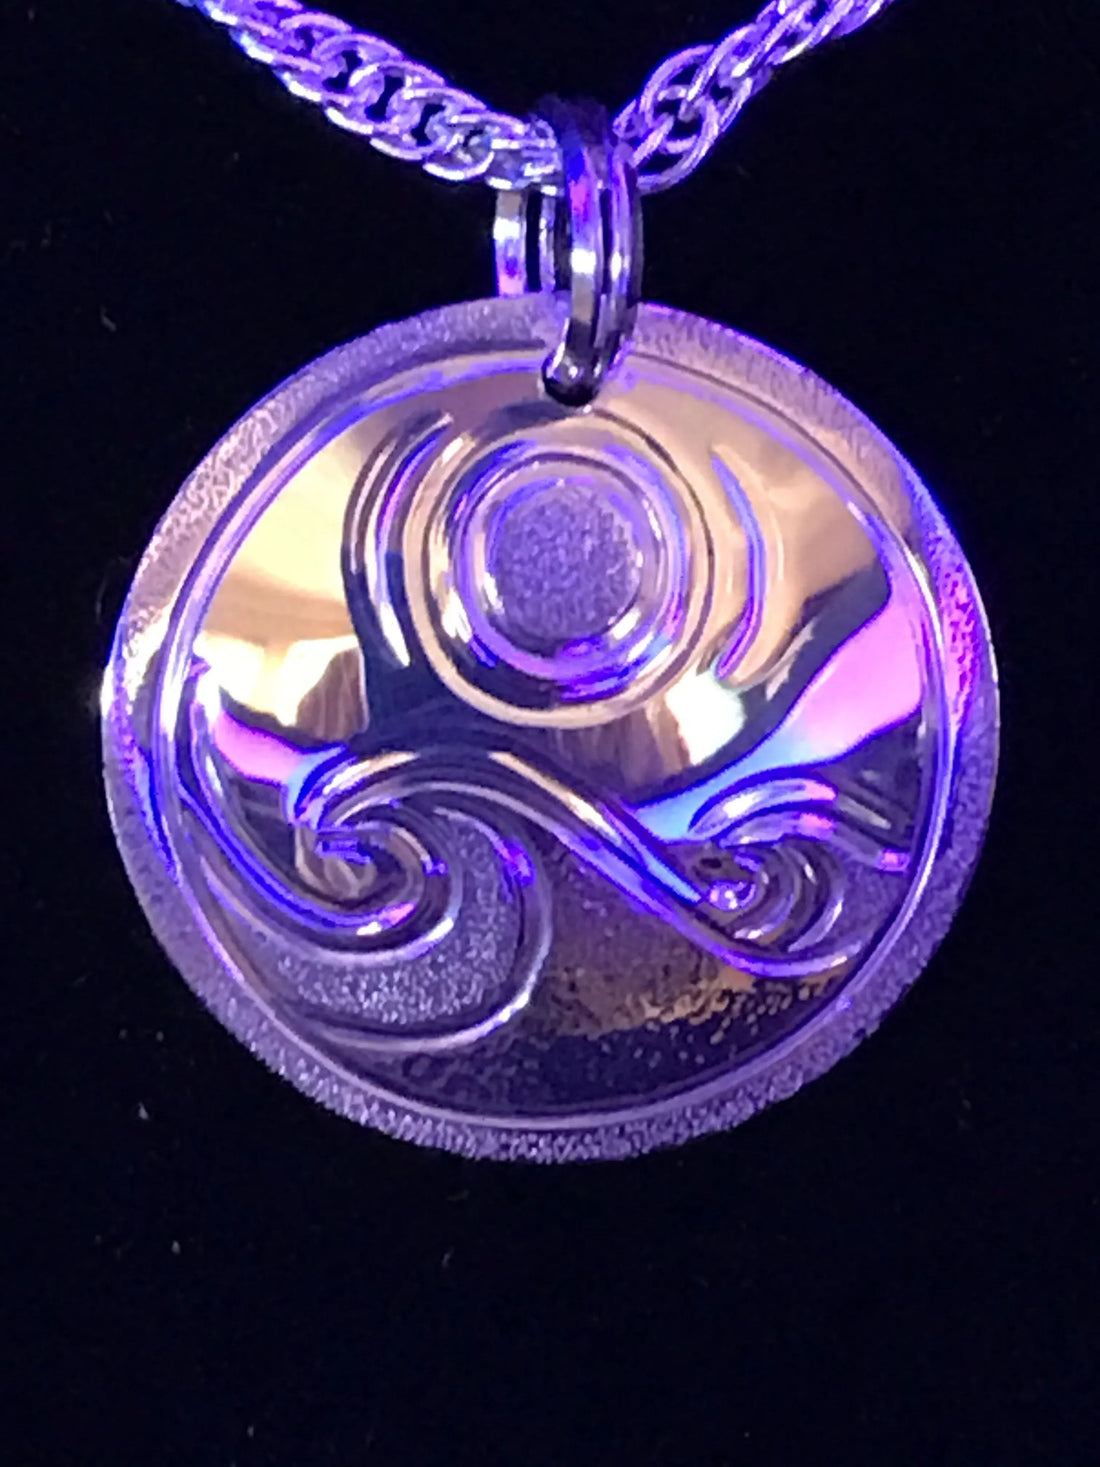 Waves & Full Moon sterling silver round pendant